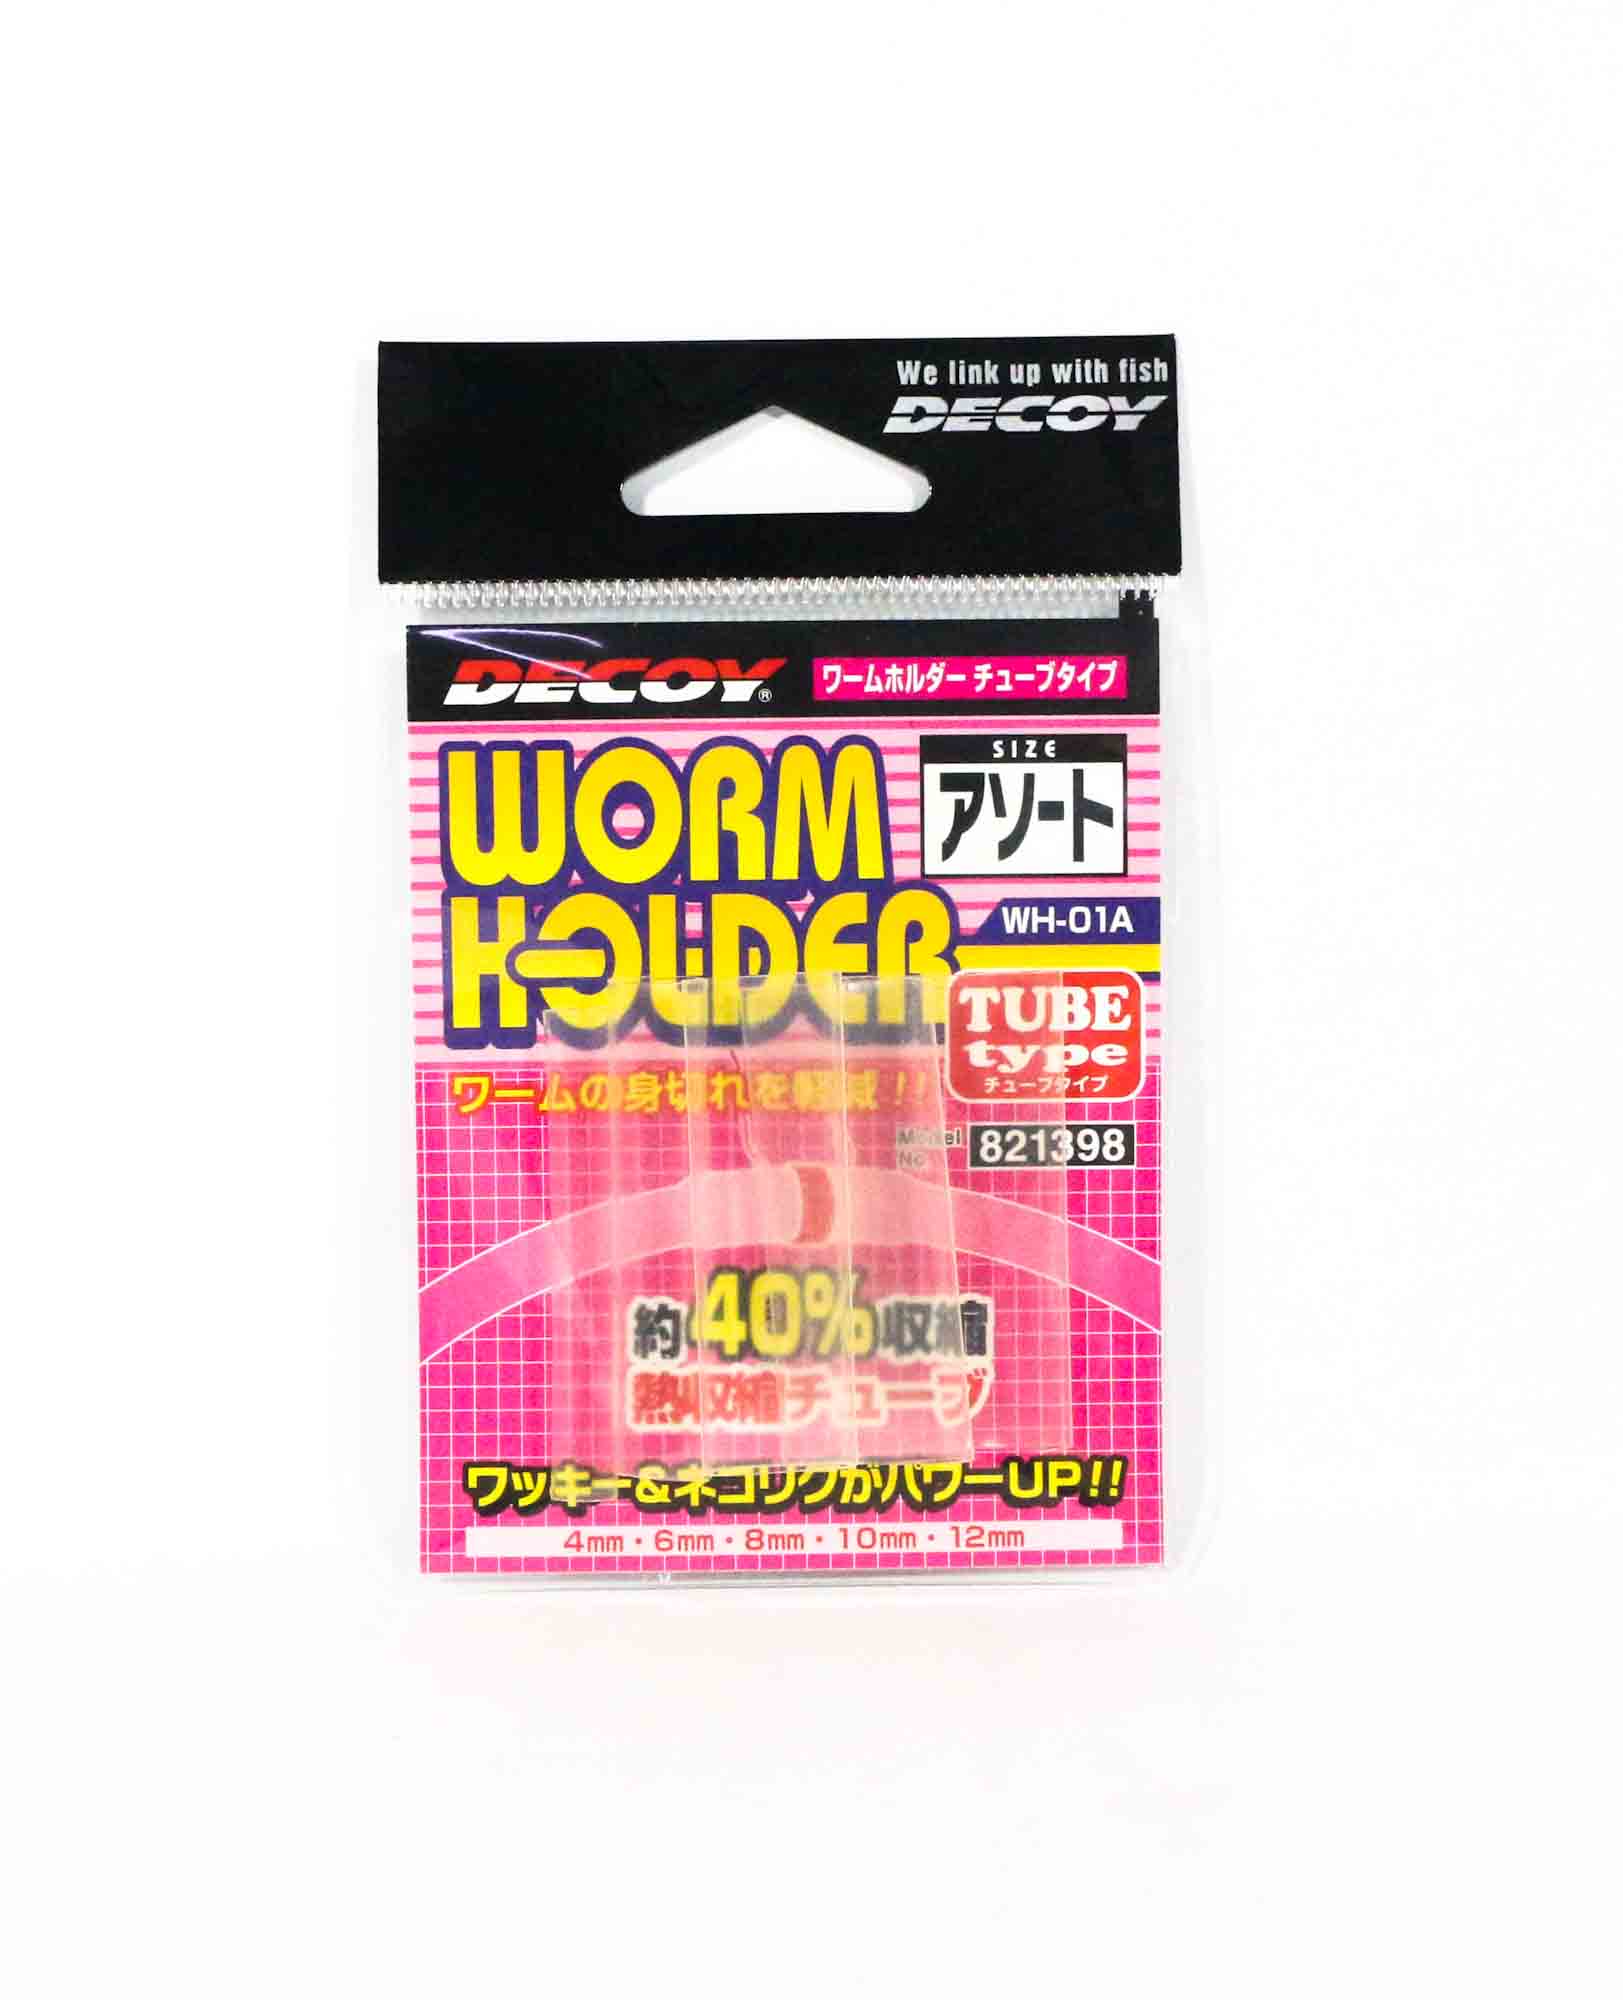 Decoy WH-01A Worm Holder Tube